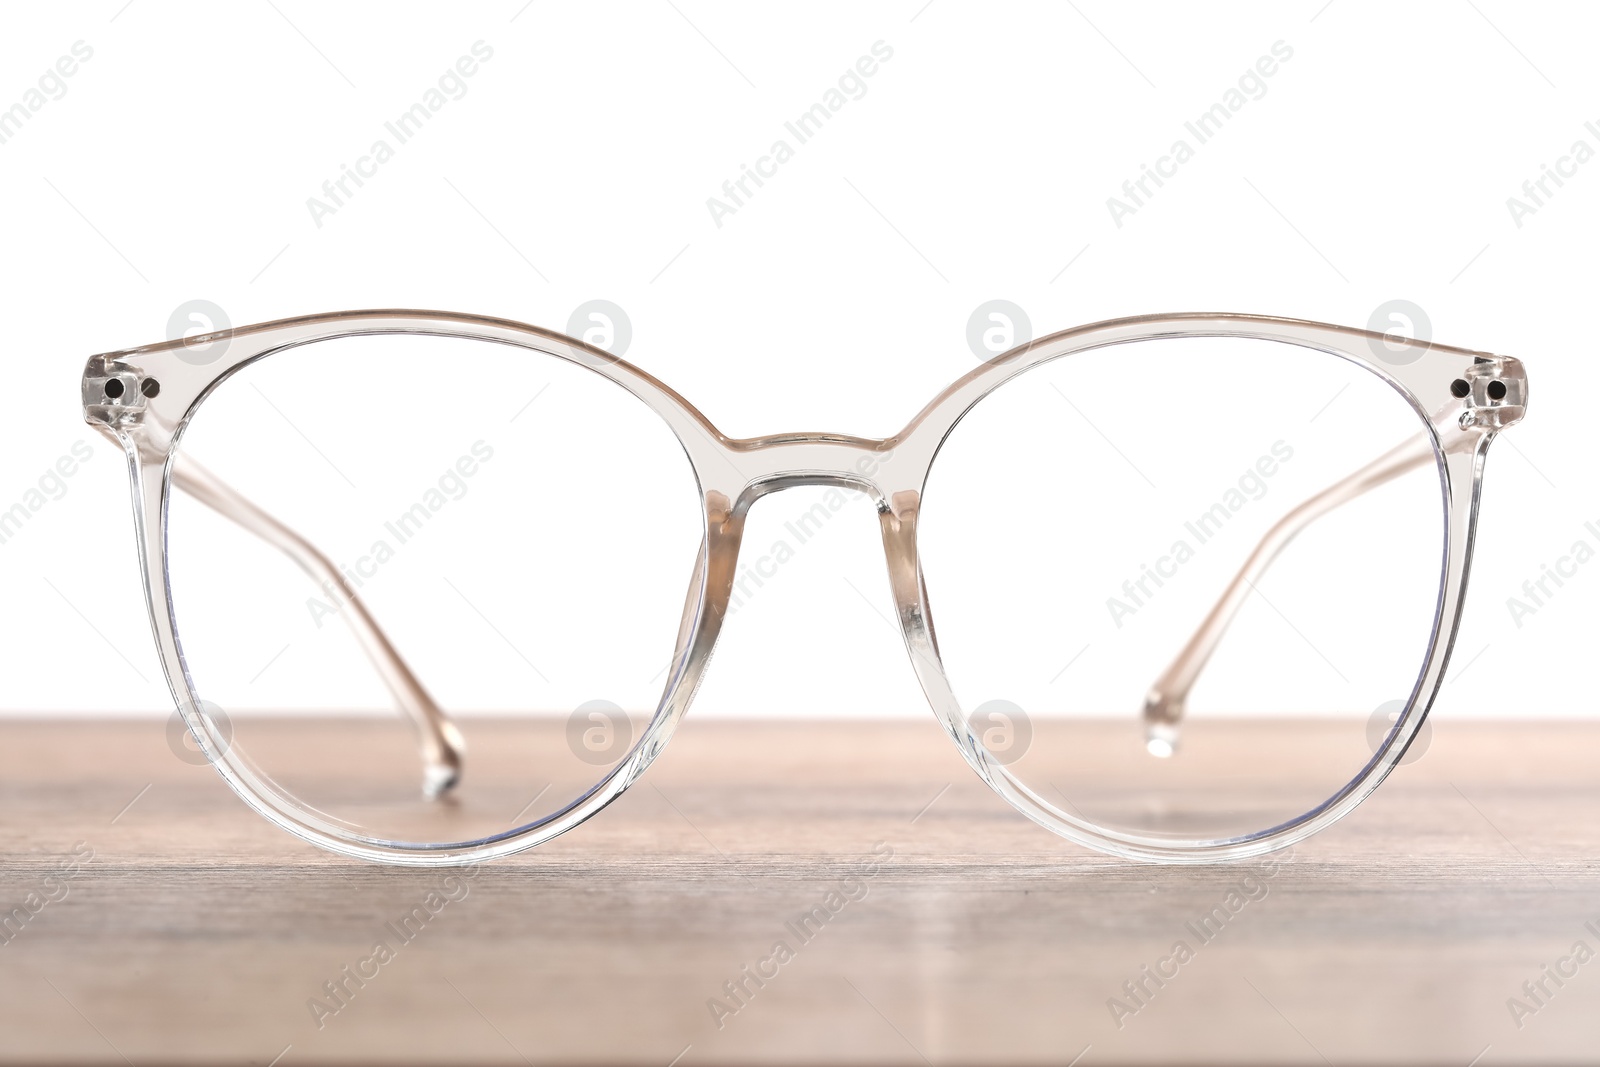 Photo of Stylish glasses with transparent frame on wooden table against white background